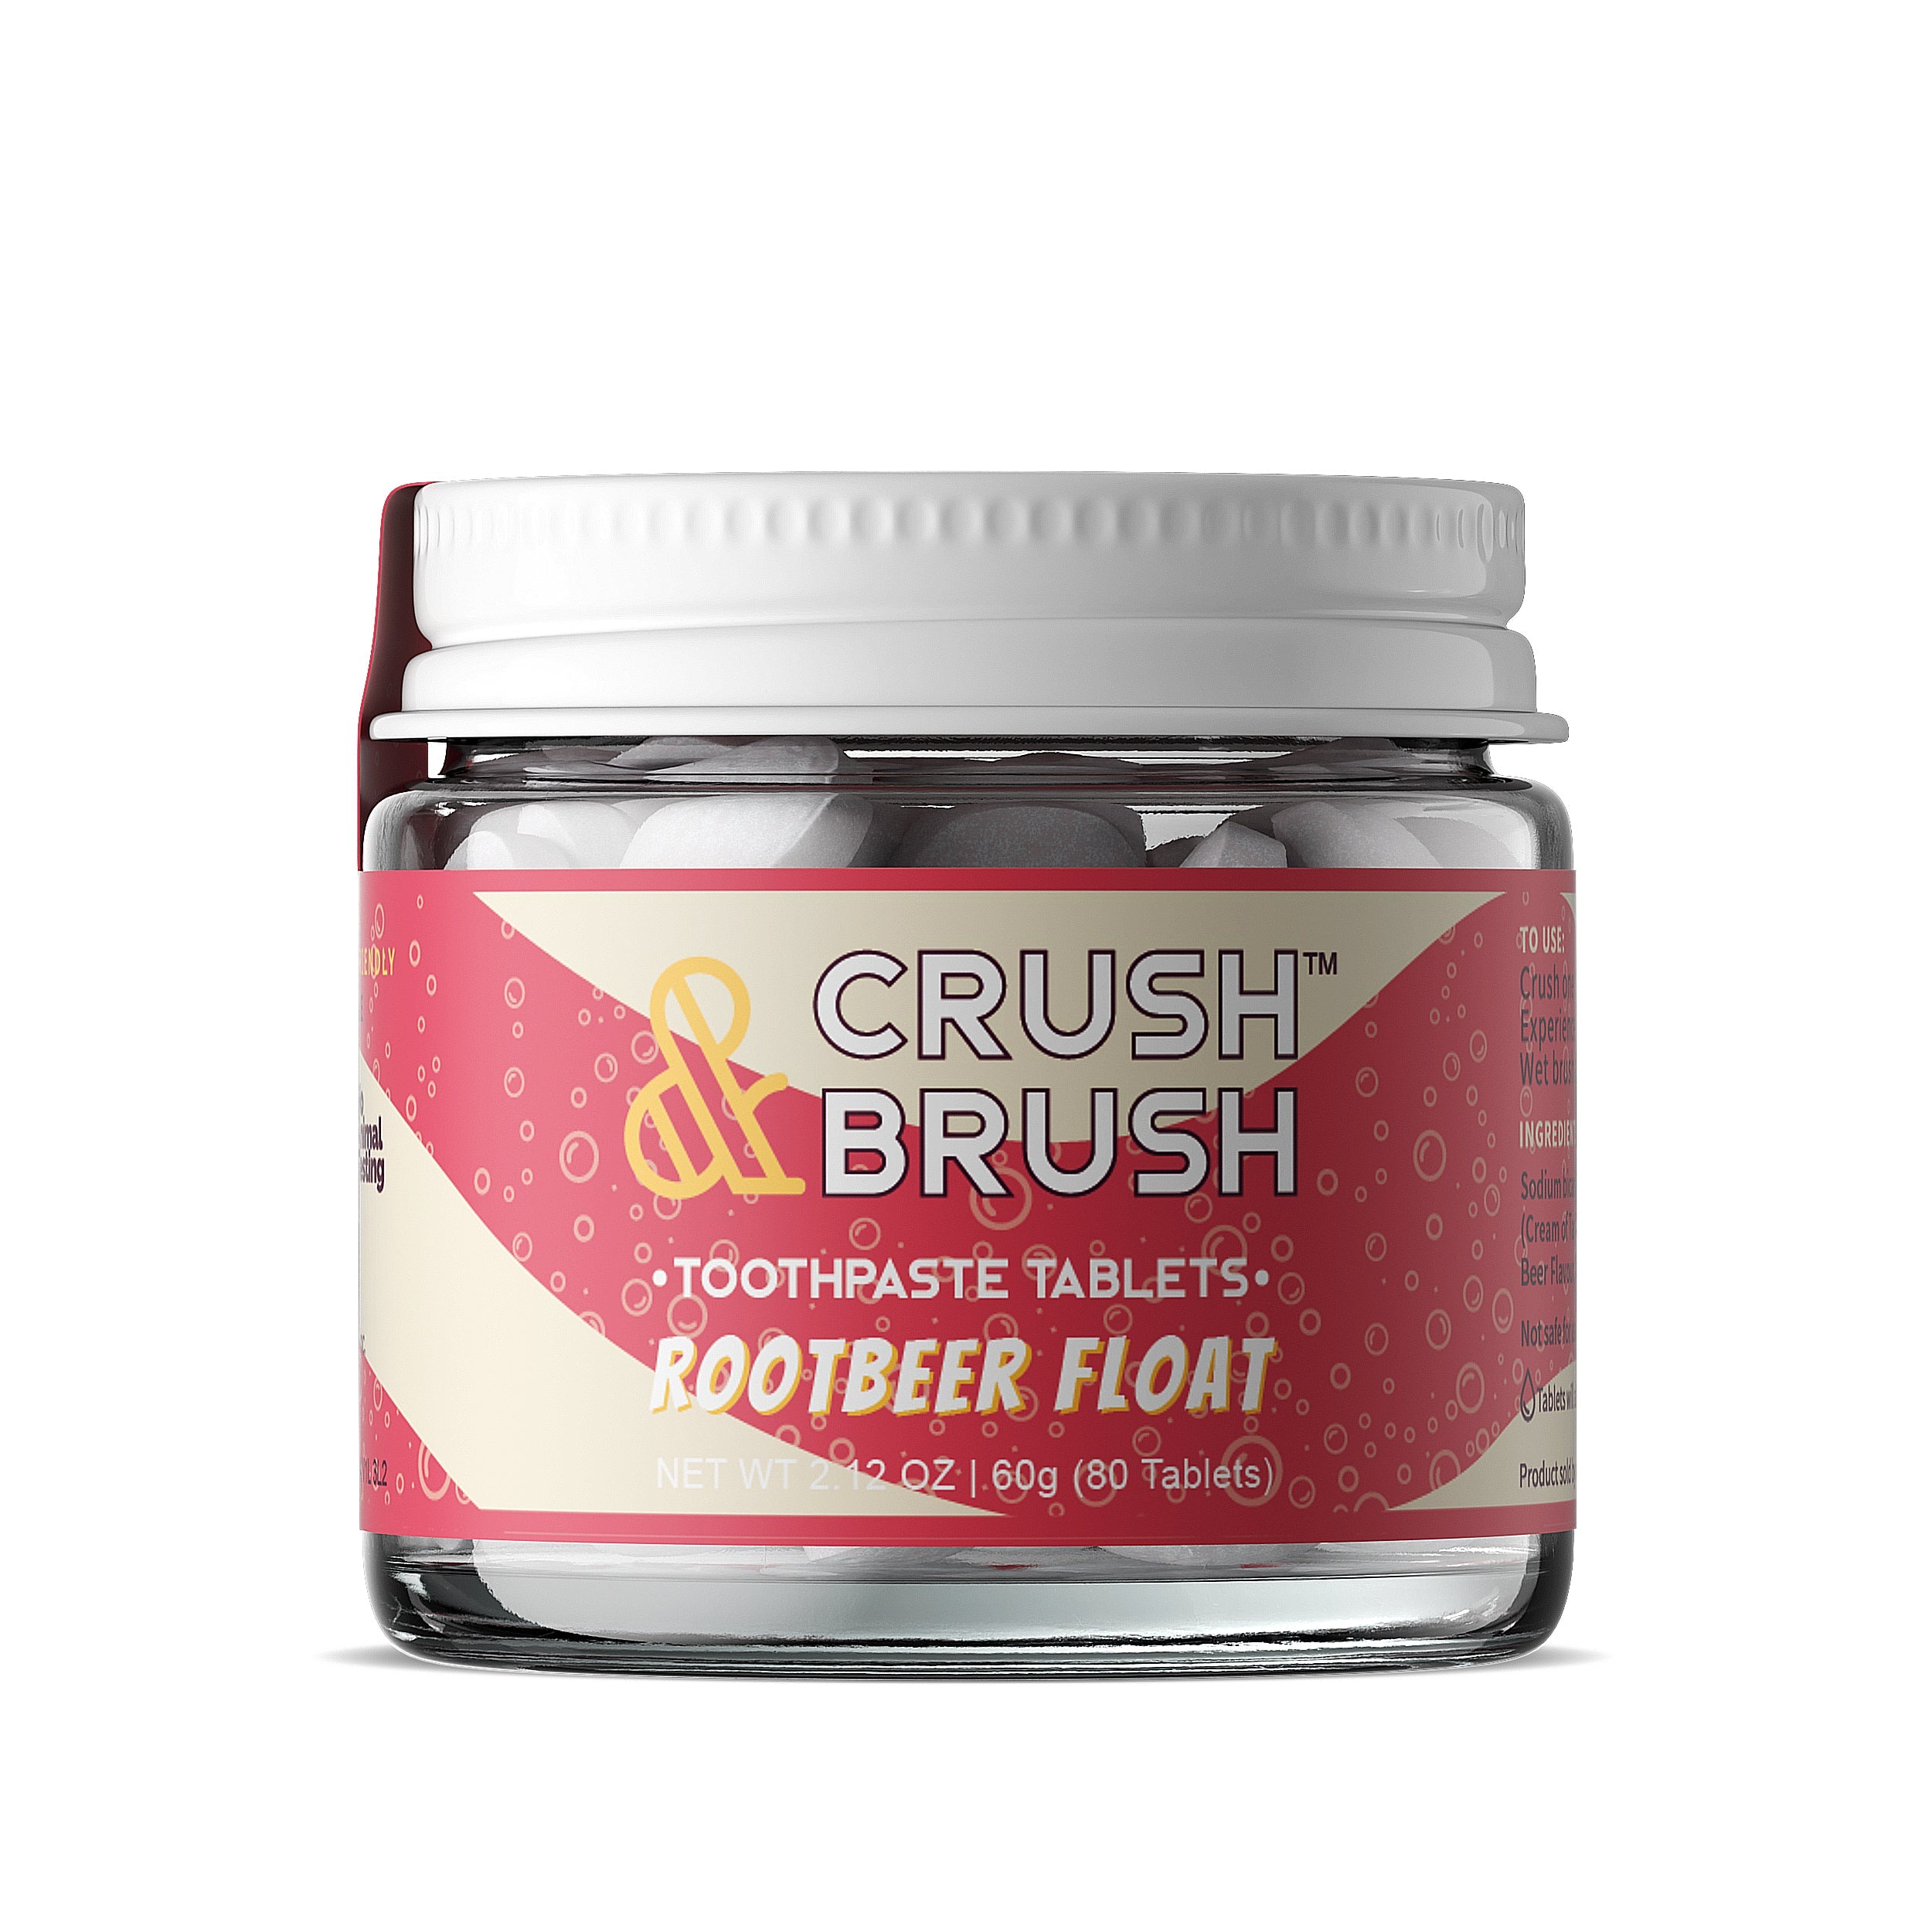 Crush & Brush ROOTBEER FLOAT 60g - WHOLESALE Toothpaste - nelsonnaturals remineralizing toothpaste